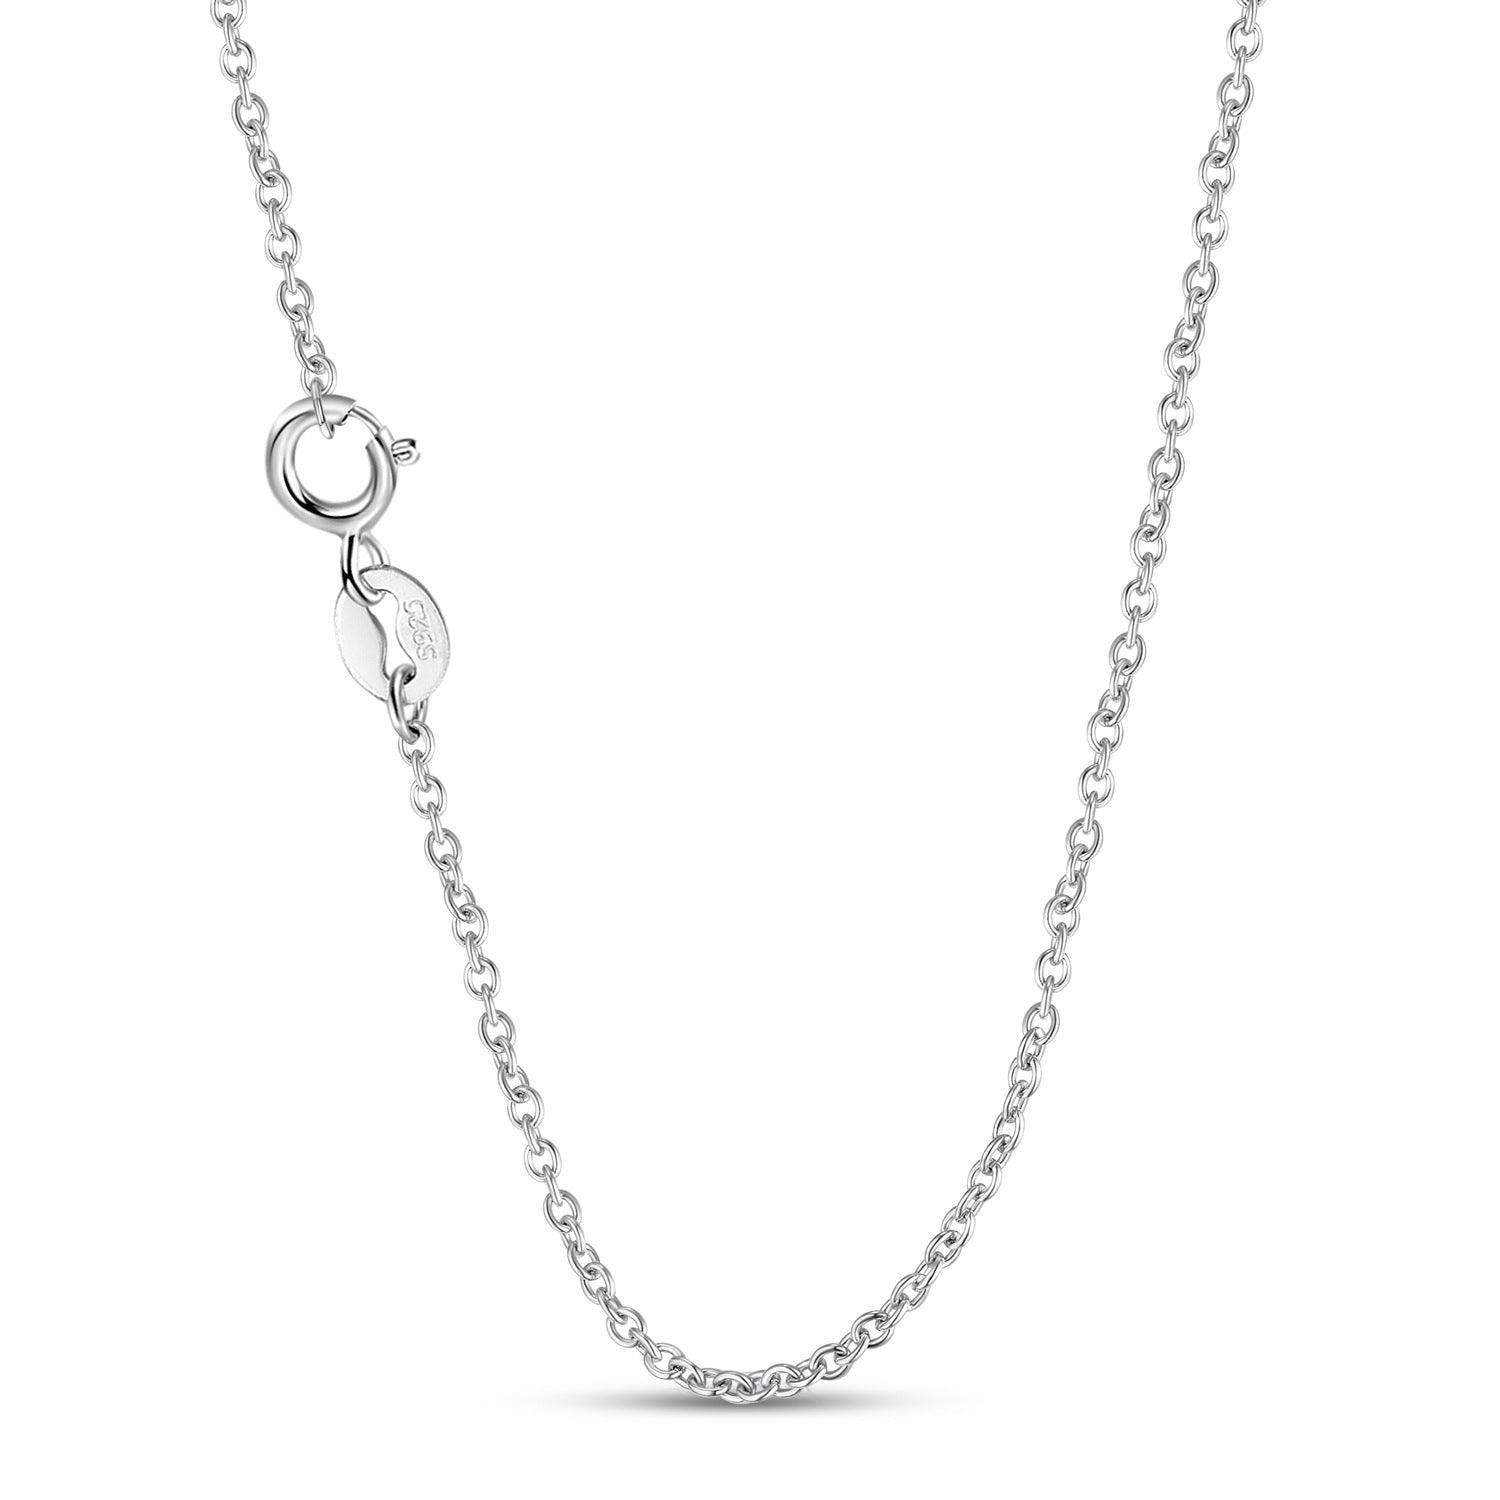 S925 Silver Gel Christmas Crutches Necklace for Christmas 2023 | S925 Silver Gel Christmas Crutches Necklace - undefined | Christmas Crutches Necklace, Female Forest Collar Chain, Gift Necklace, Necklaces | From Hunny Life | hunnylife.com